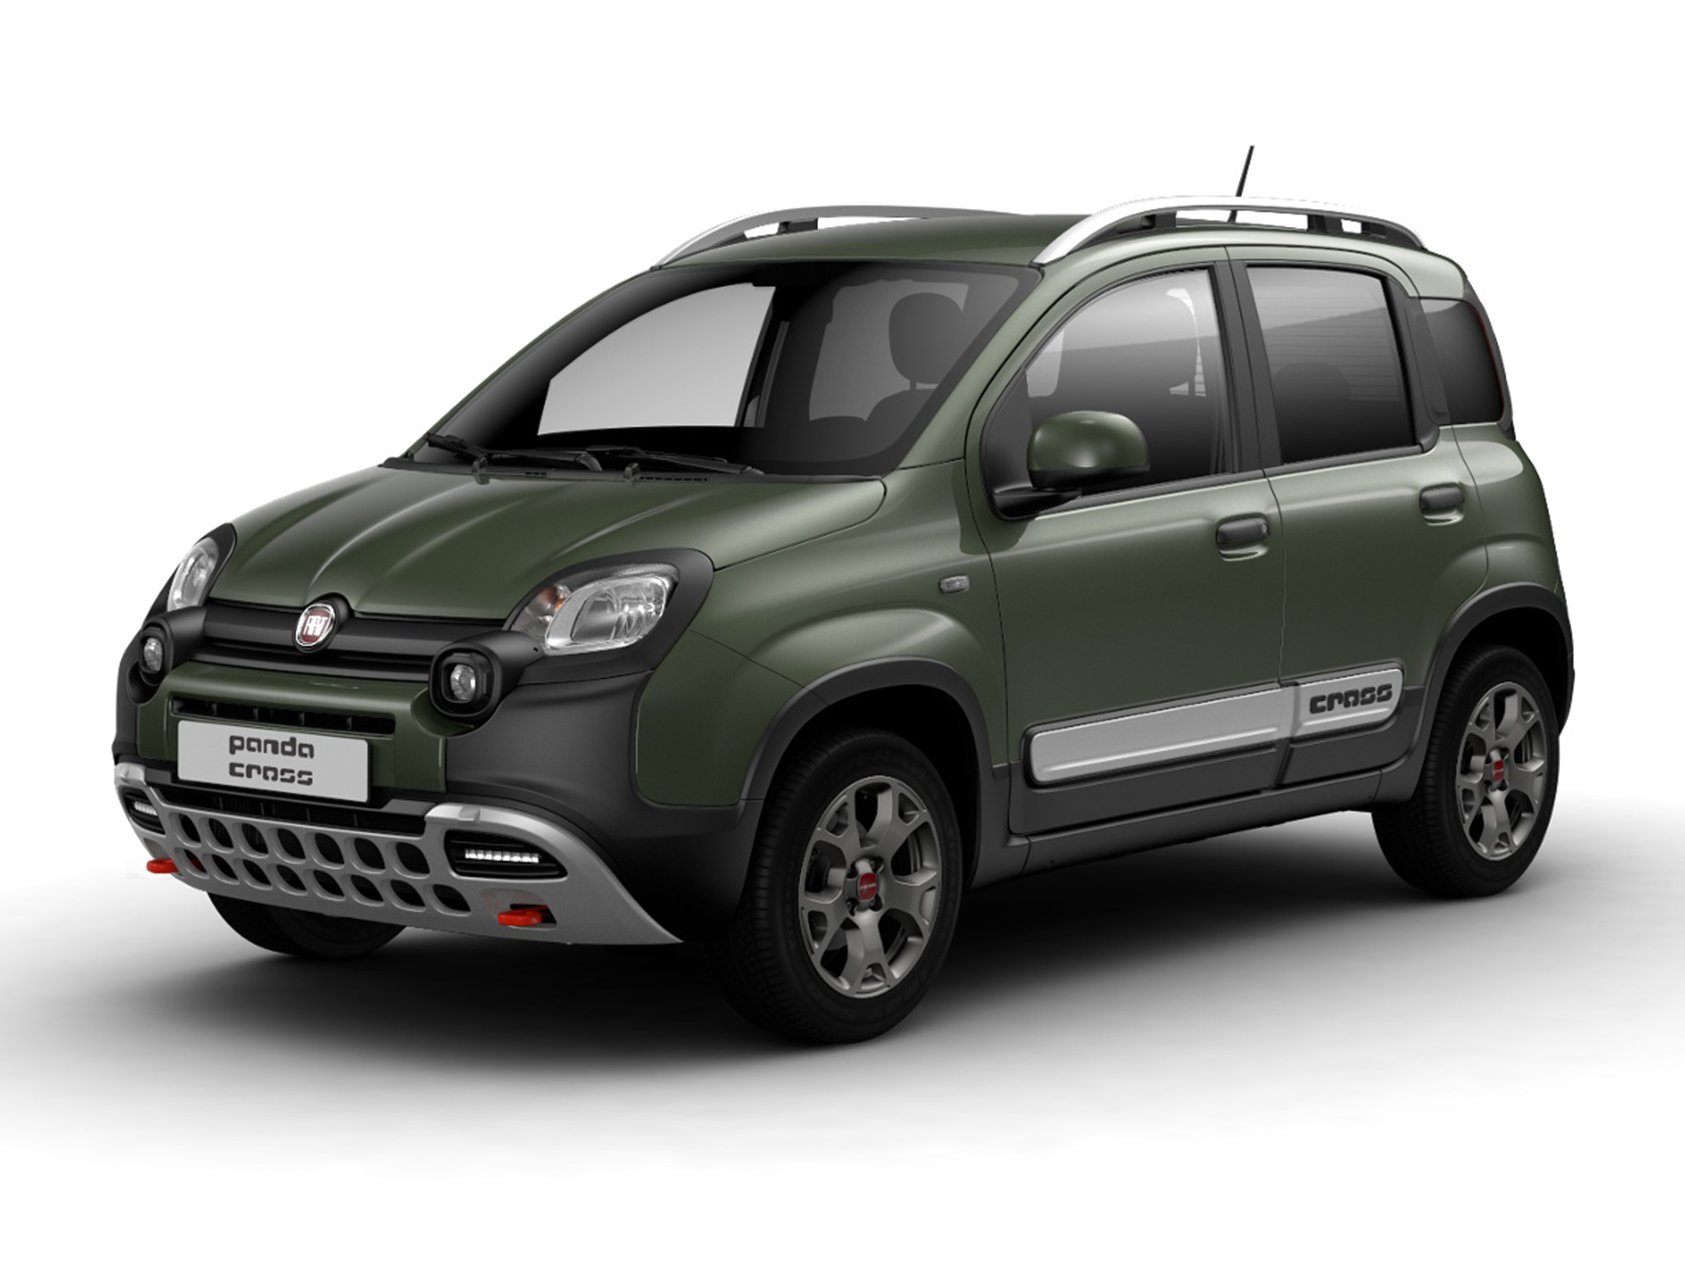 Used Fiat Panda Cars For Sale | AutoTrader UK